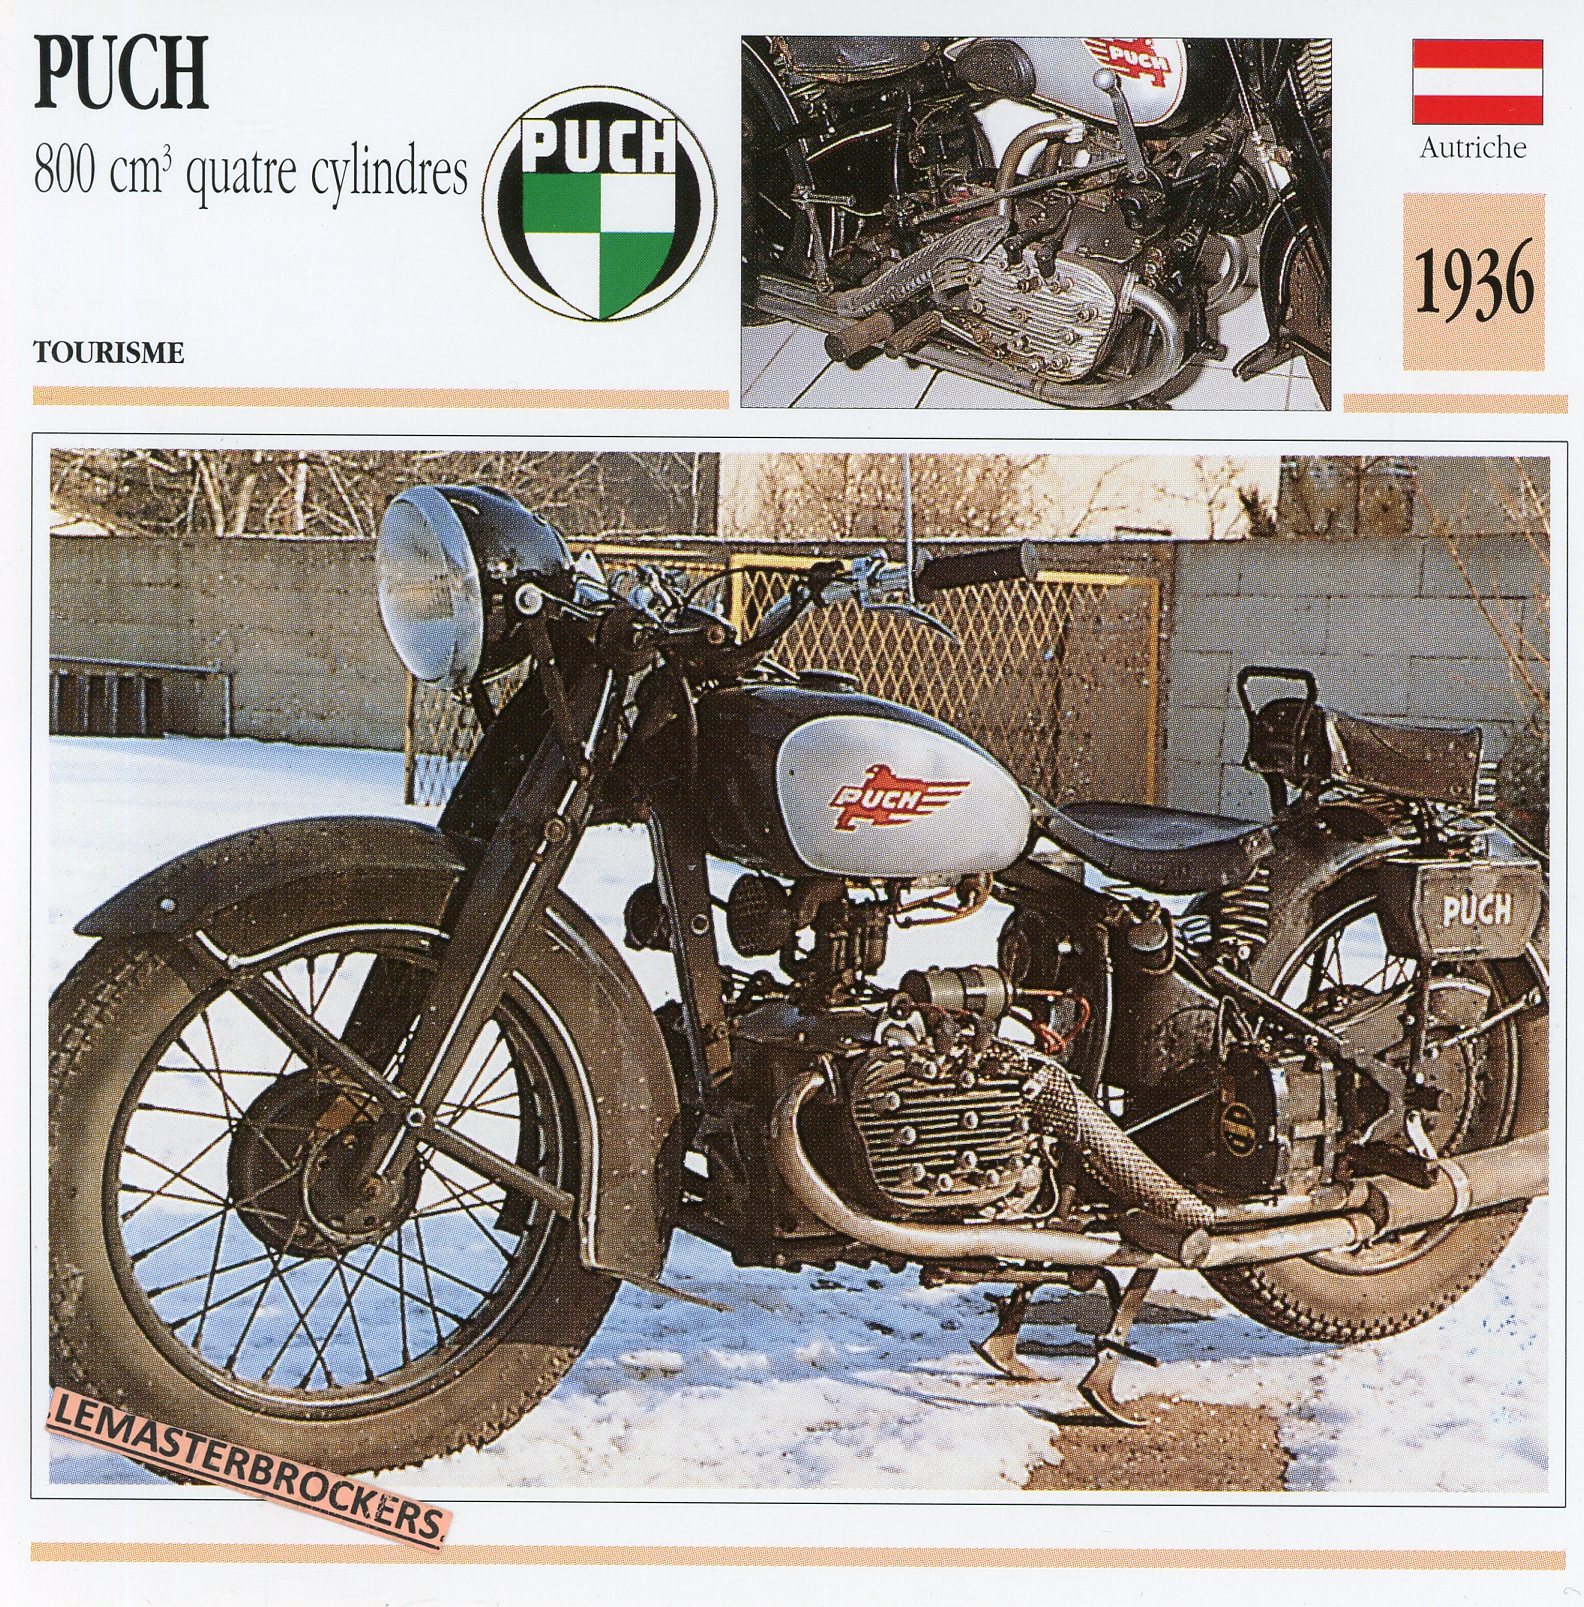 MOTO-PUCH-800-1936-FICHE-MOTO-MOTORCYCLE-CARDS-ATLAS-LEMASTERBROCKERS